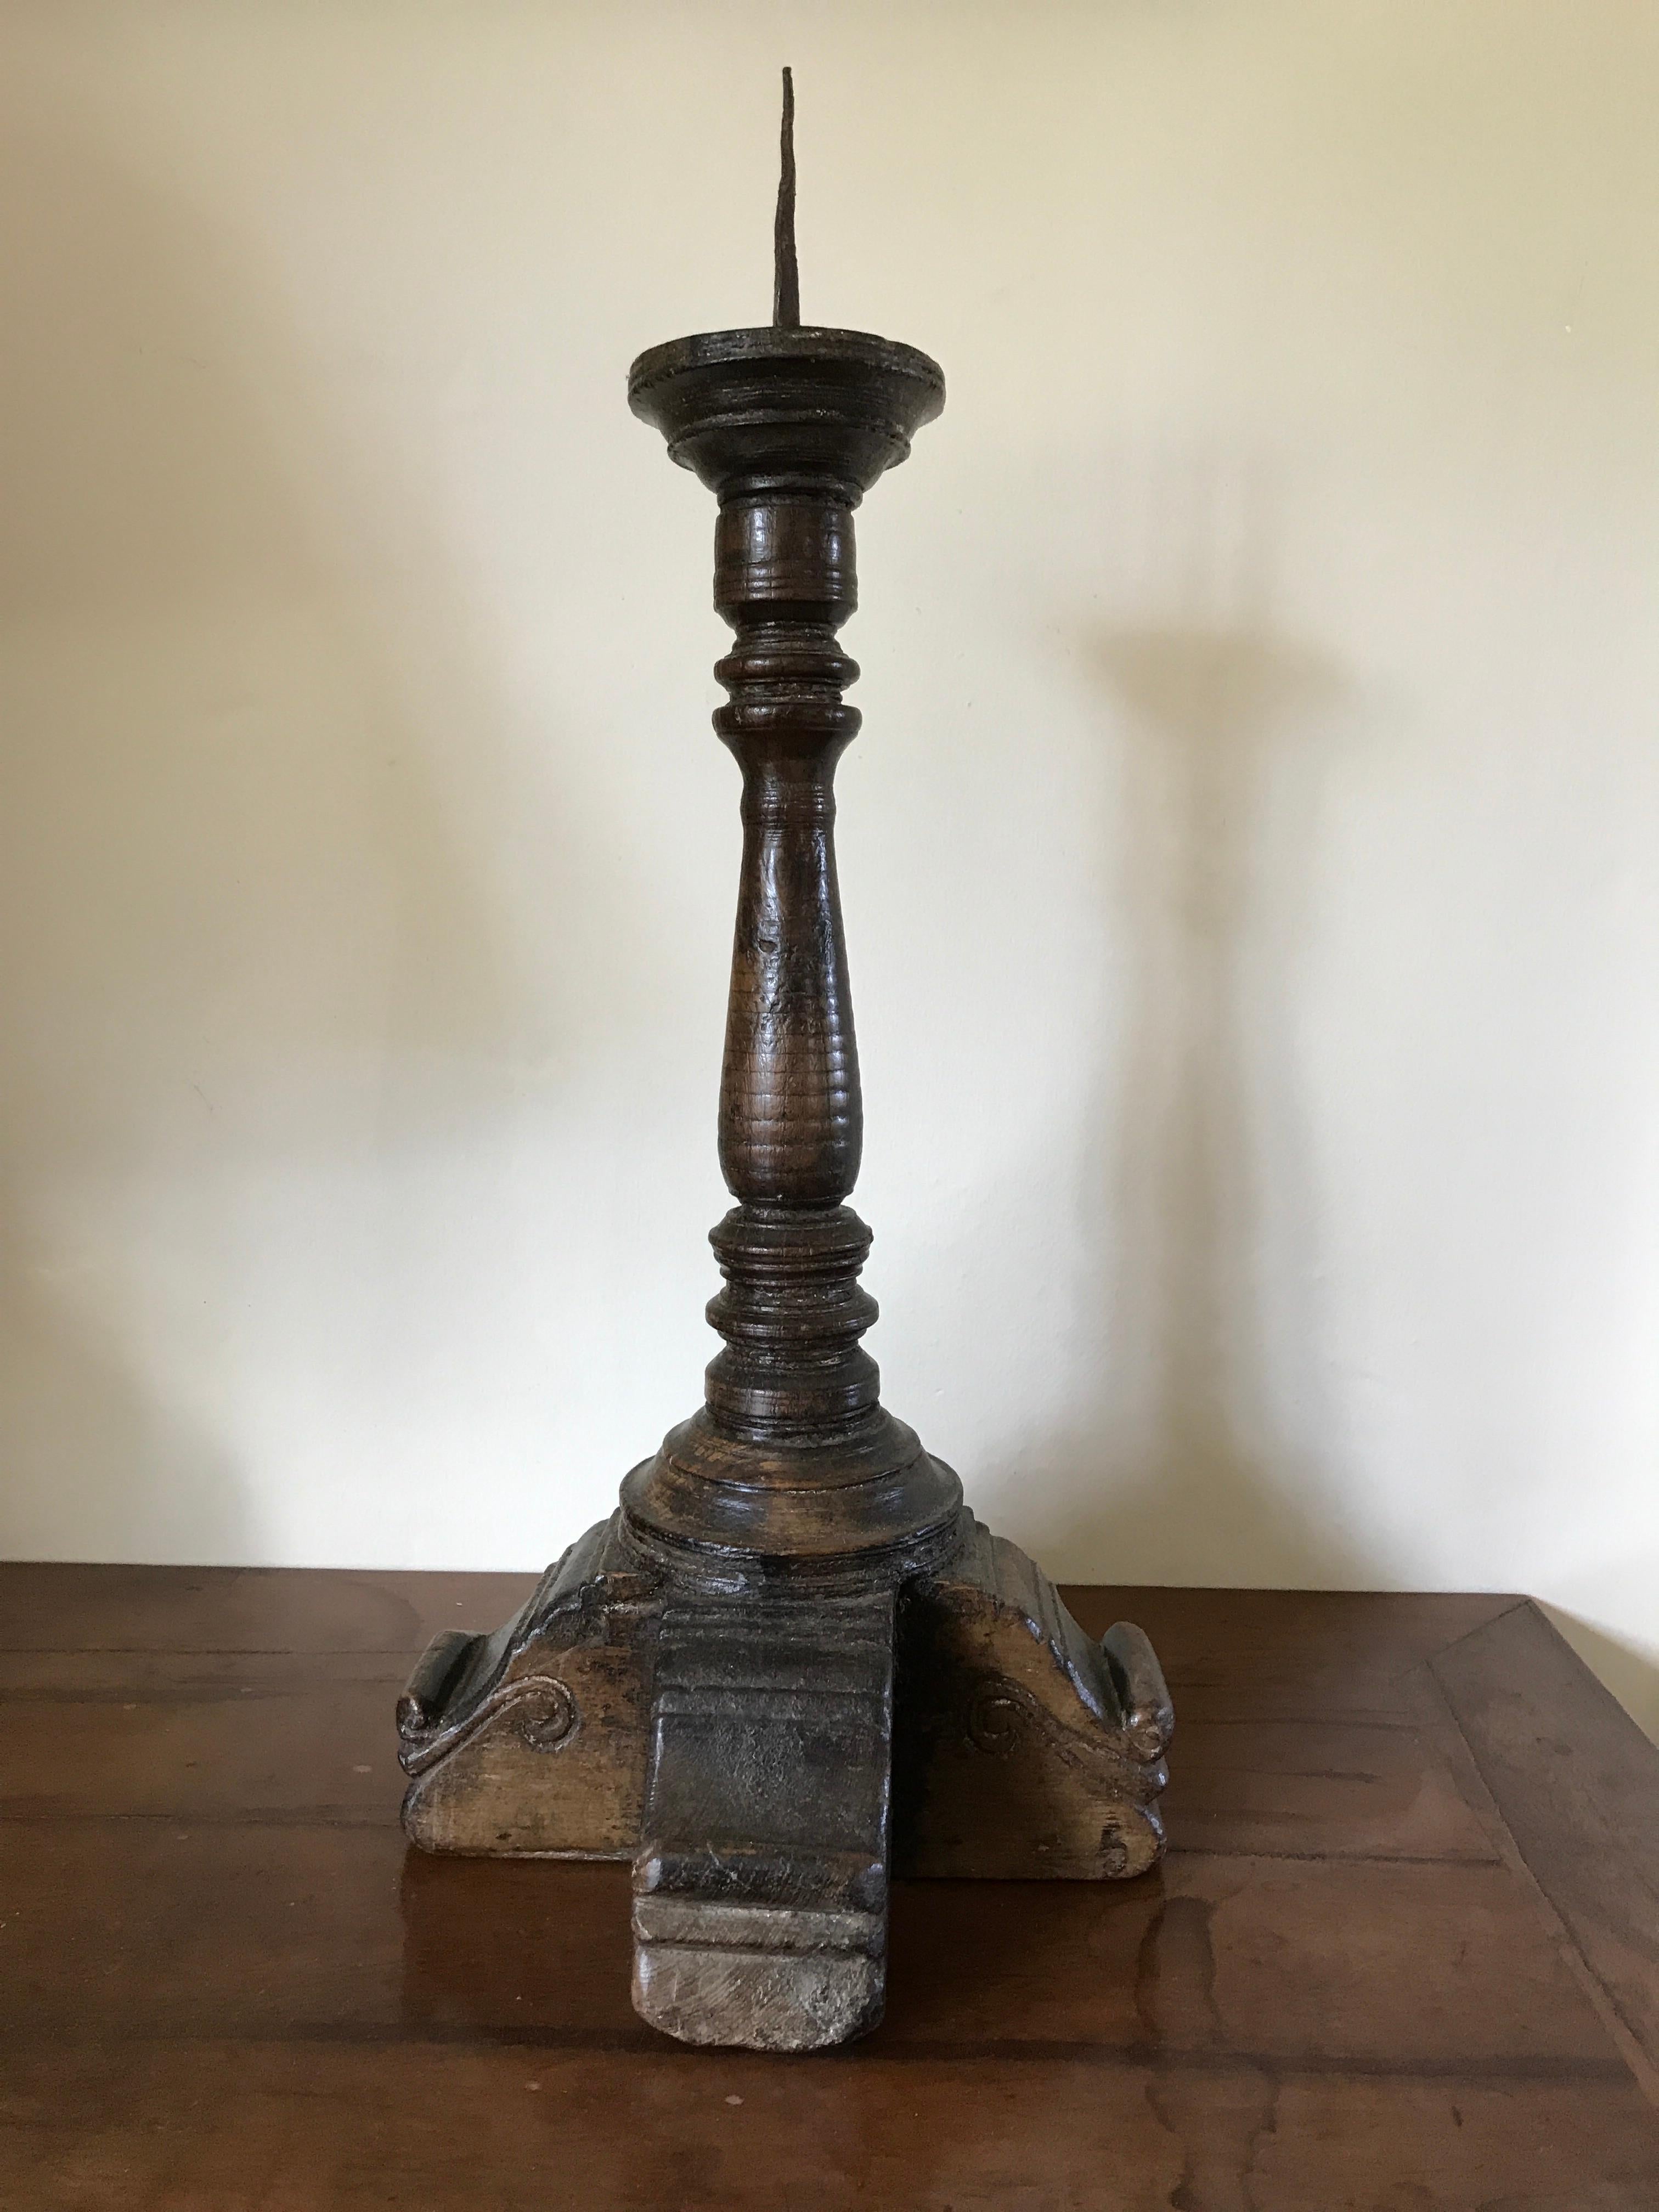 Museum quality, Gothic, oak pricket candlestick
Rare survival, few candlesticks of this age and quality survive, generally only seen in museum collections

- Has a tactile, aesthetic
- Lovely detailing, the incised ringing on the stem and the